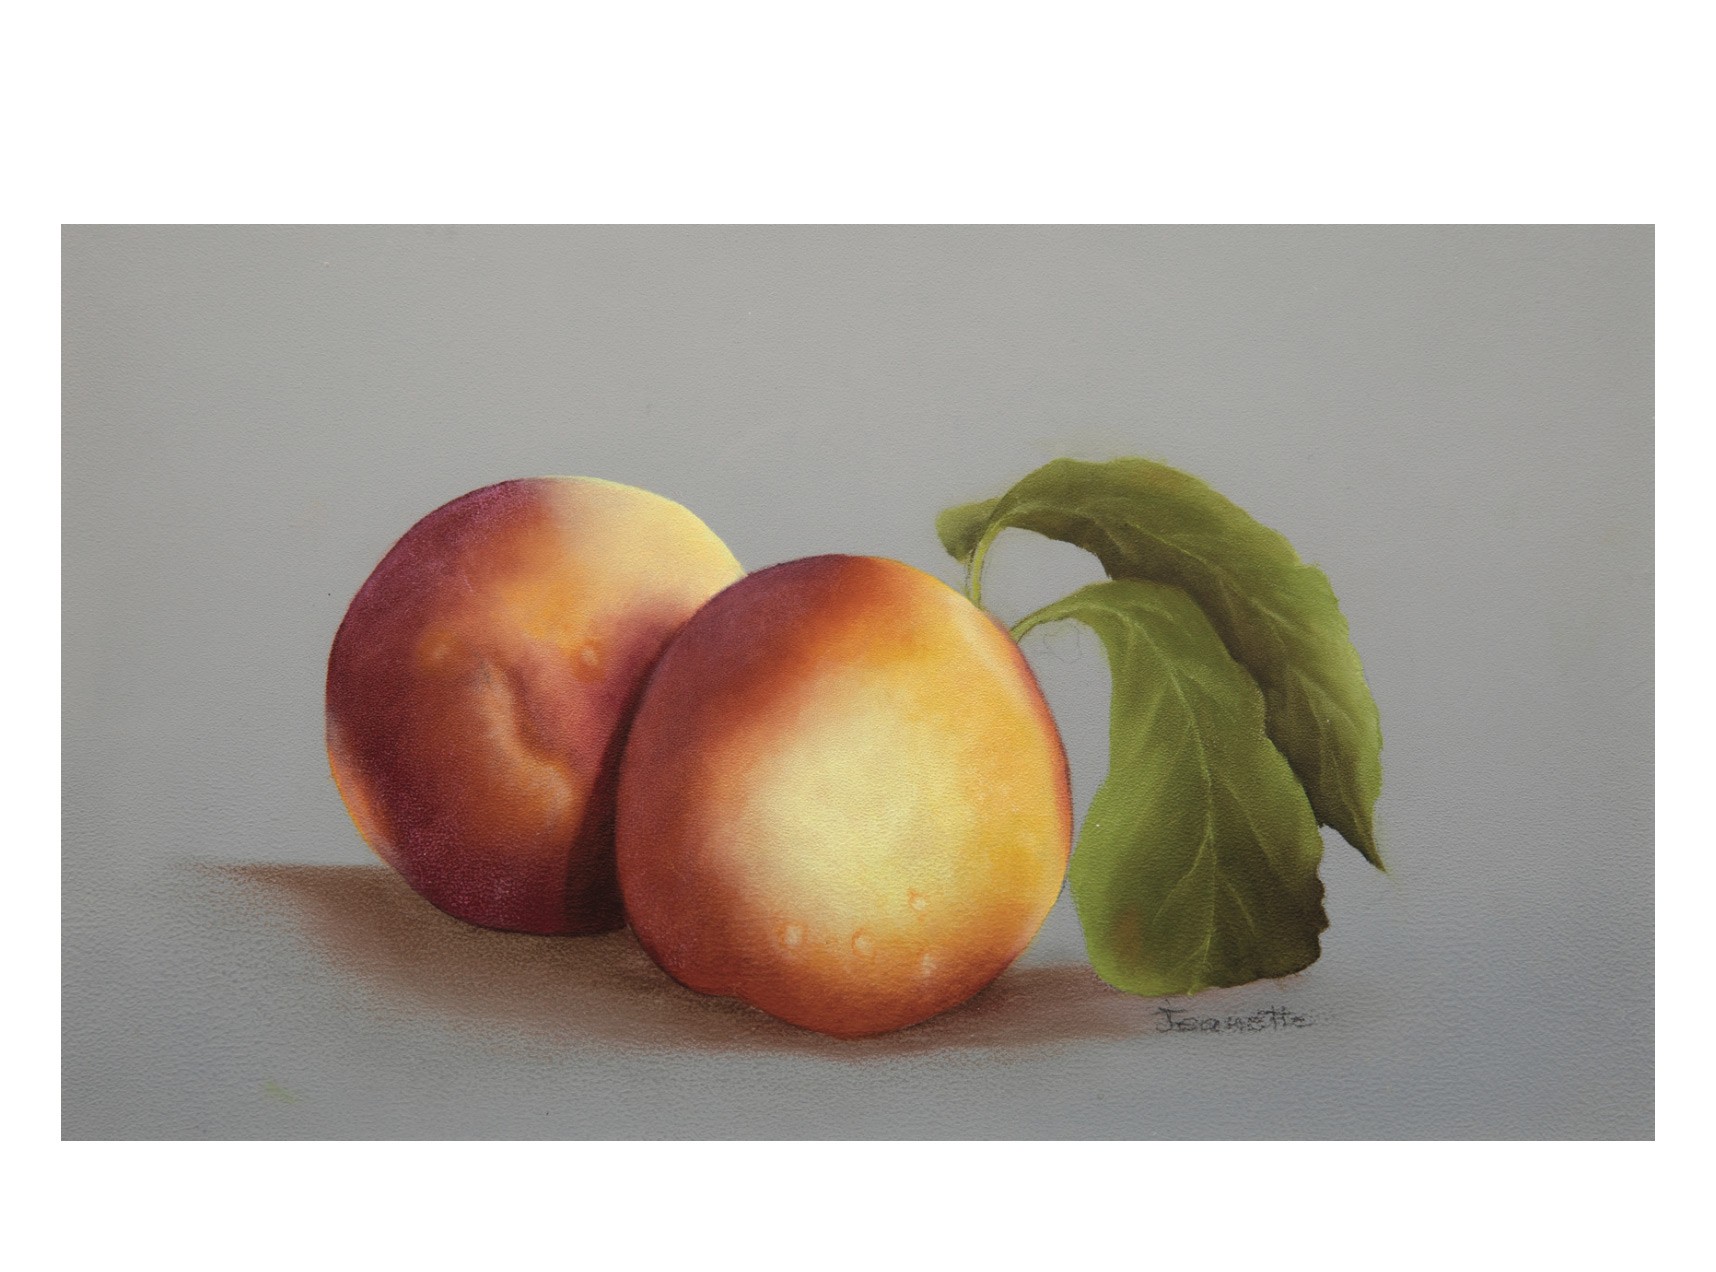 Blank - Peaches and Cream by Jeanette Bishop